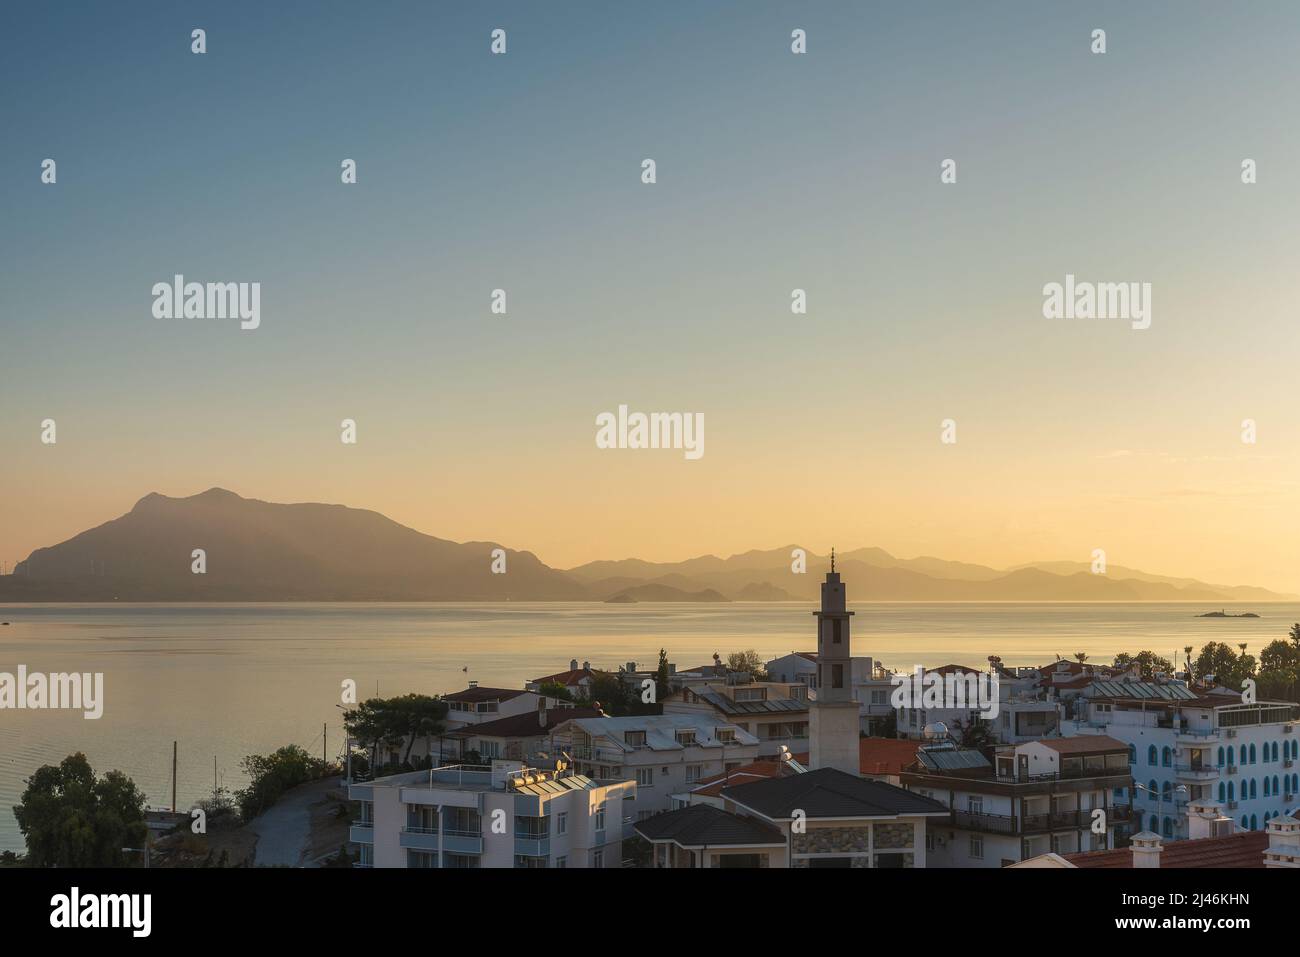 View on Datca town with harbor and island at sunrise, Mugla province, Turkey. Popular tourist summer destination in Turkey Stock Photo